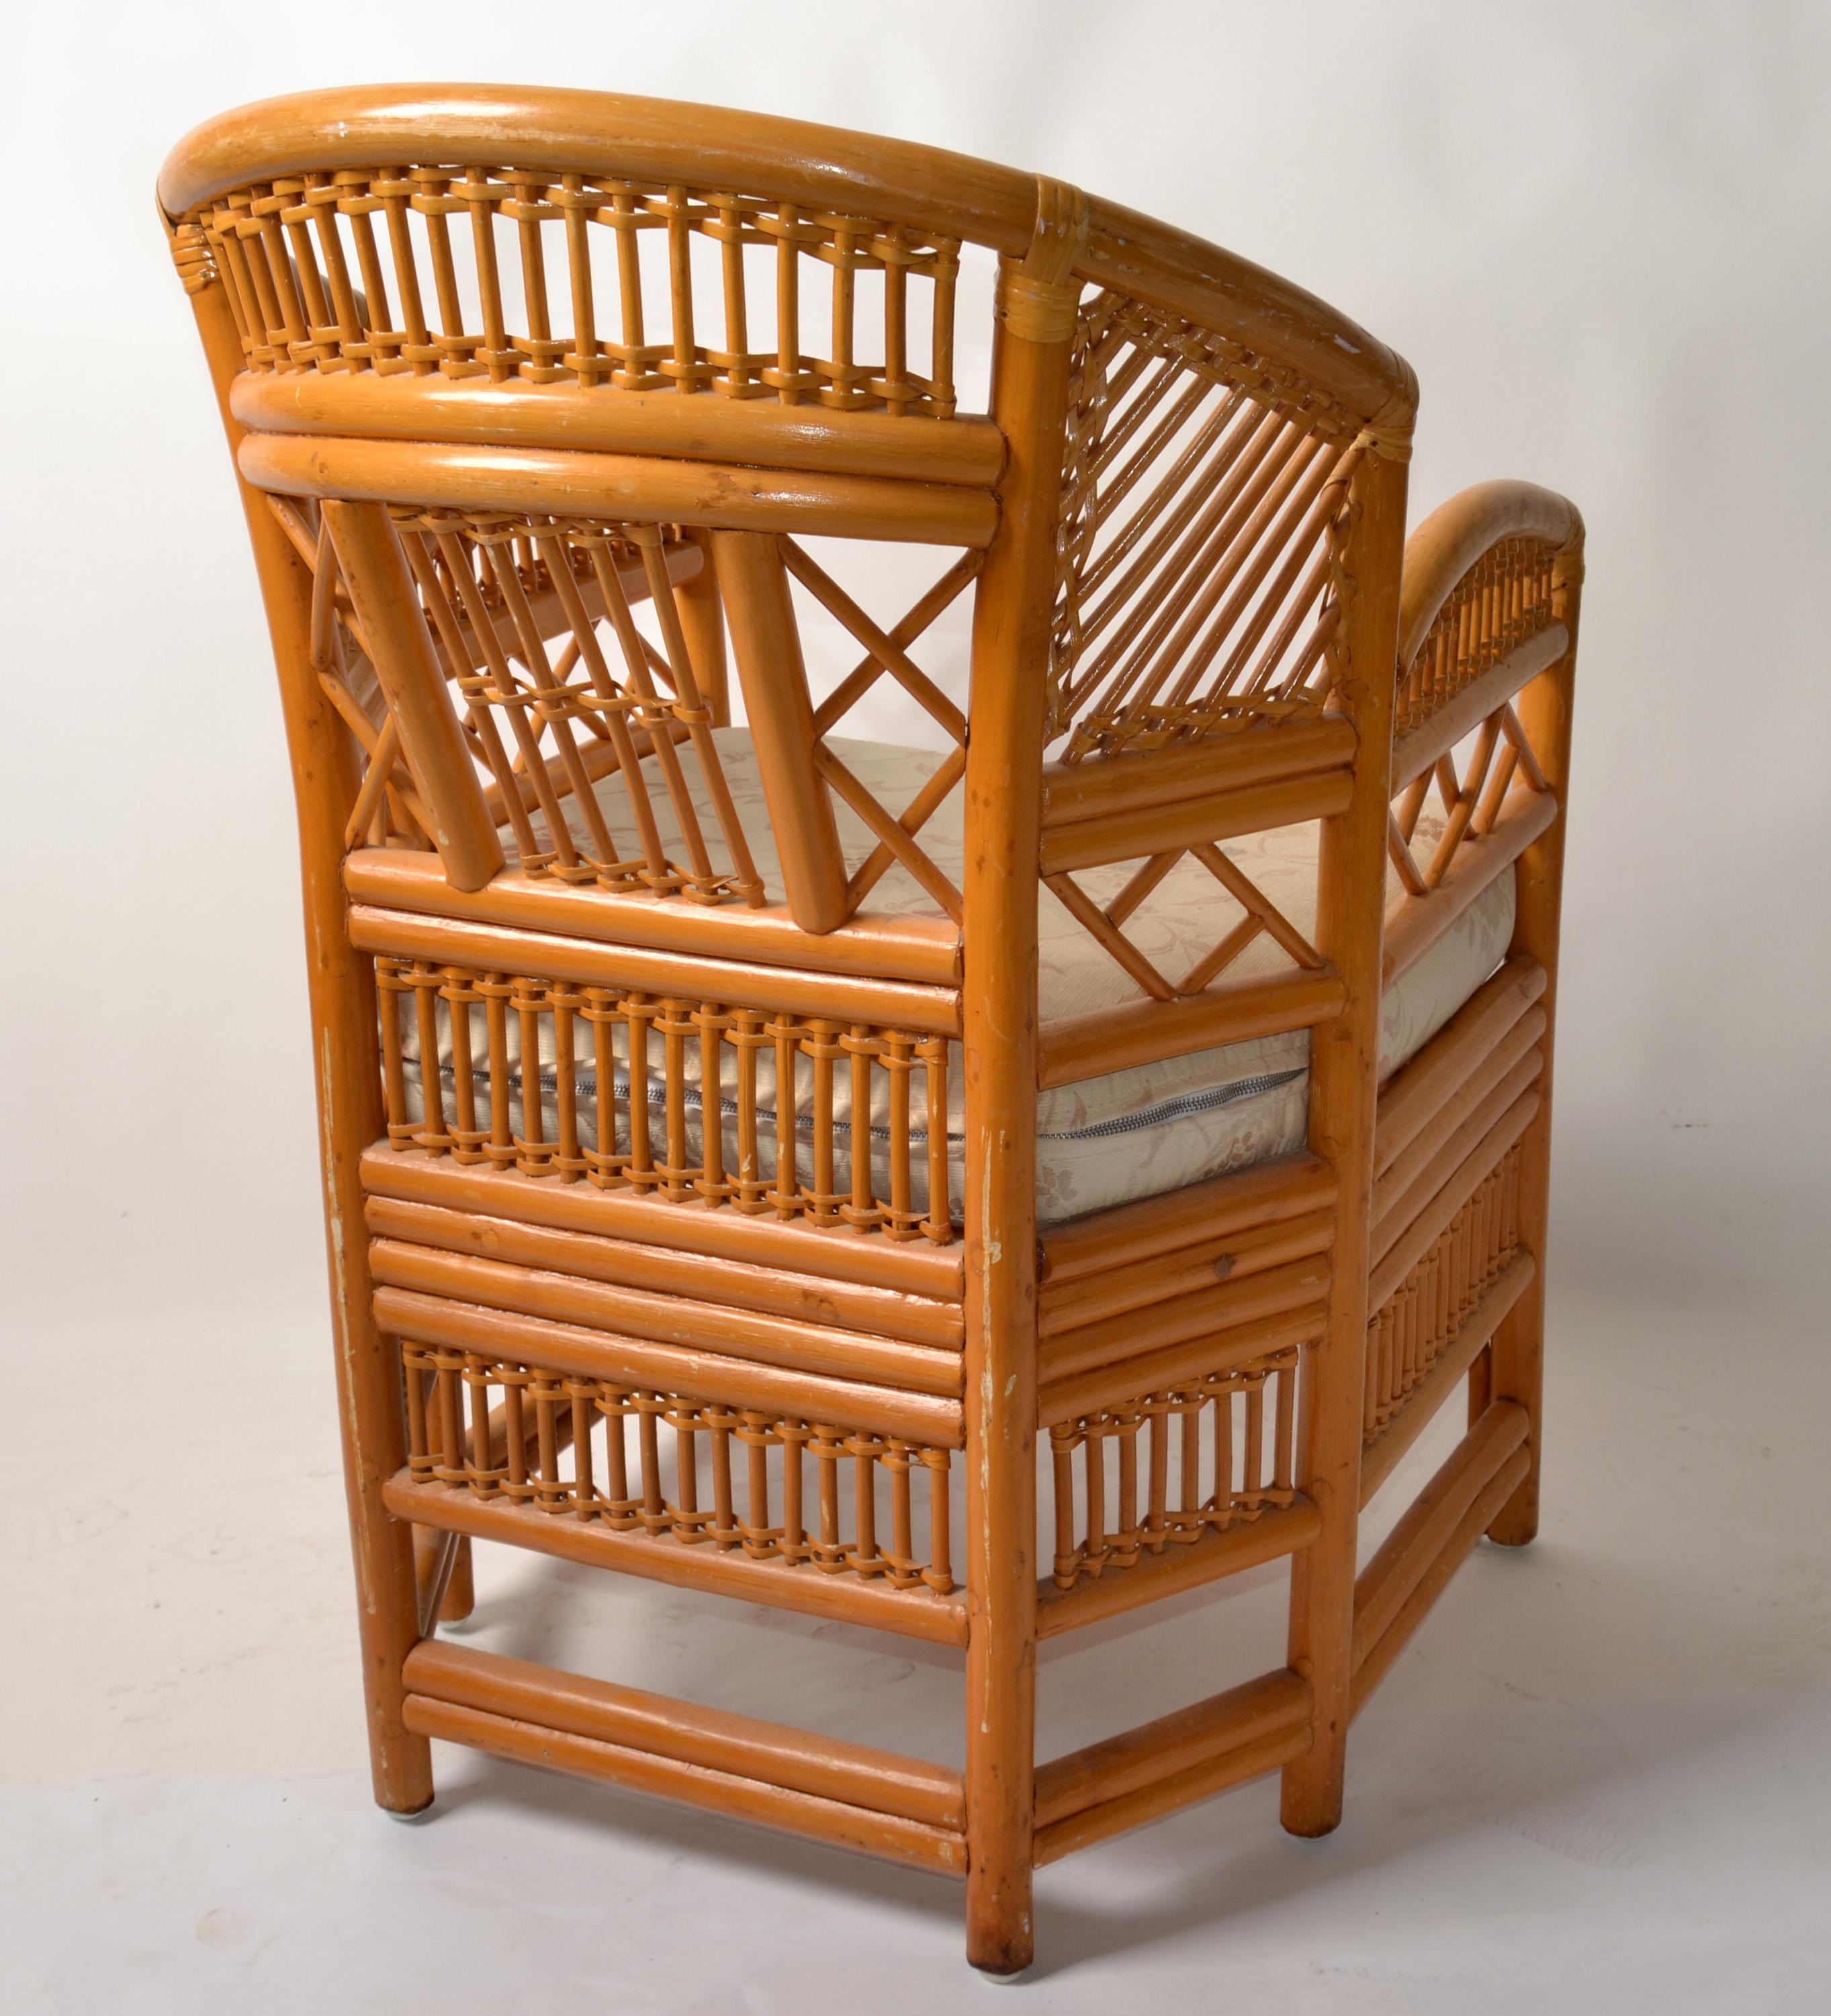 Hand-Crafted Vintage Brighton Chinoiserie Rattan Blonde Bamboo Caning Split Reed Armchair 70s For Sale